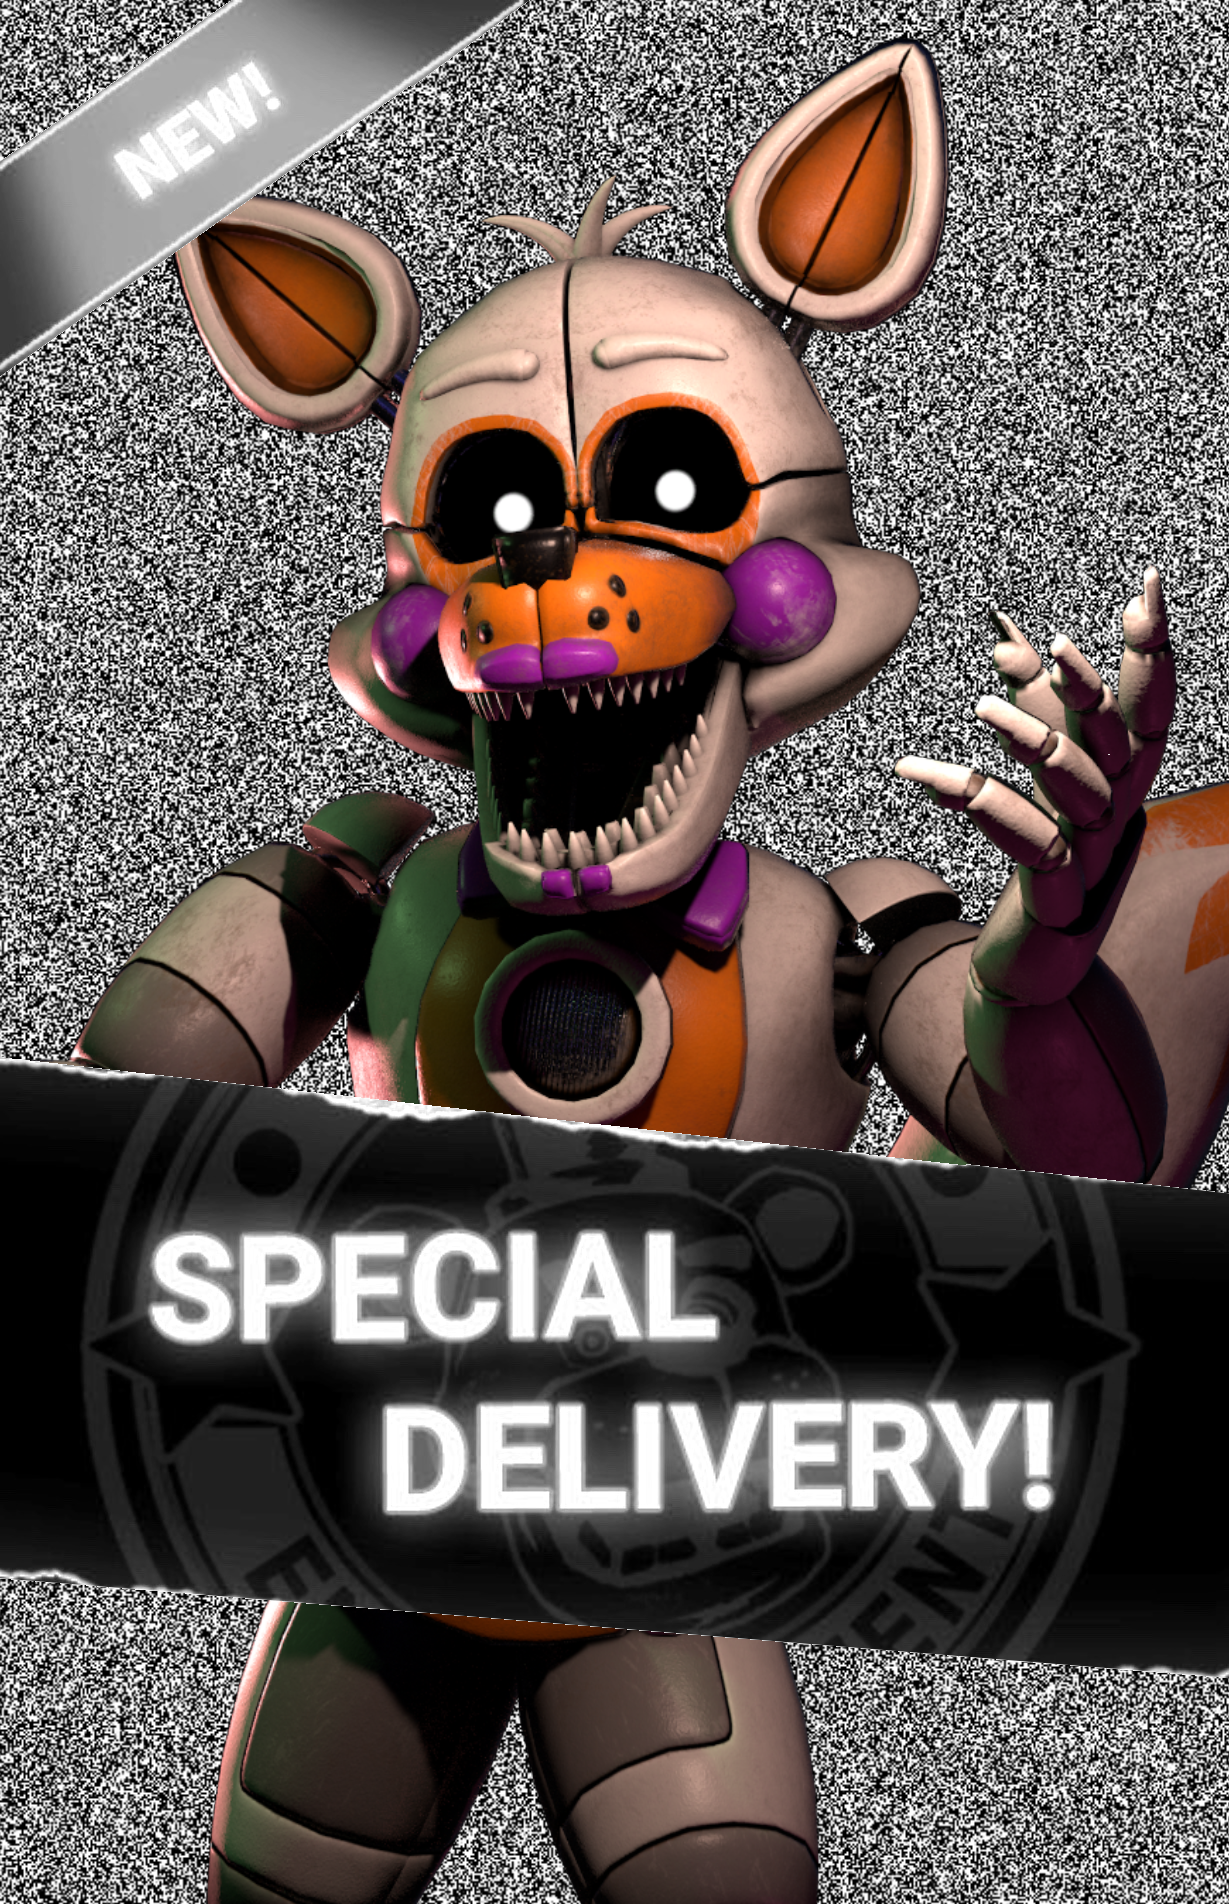 Funtime golden Freddy x lolbit (action figures) by AgentPrime on